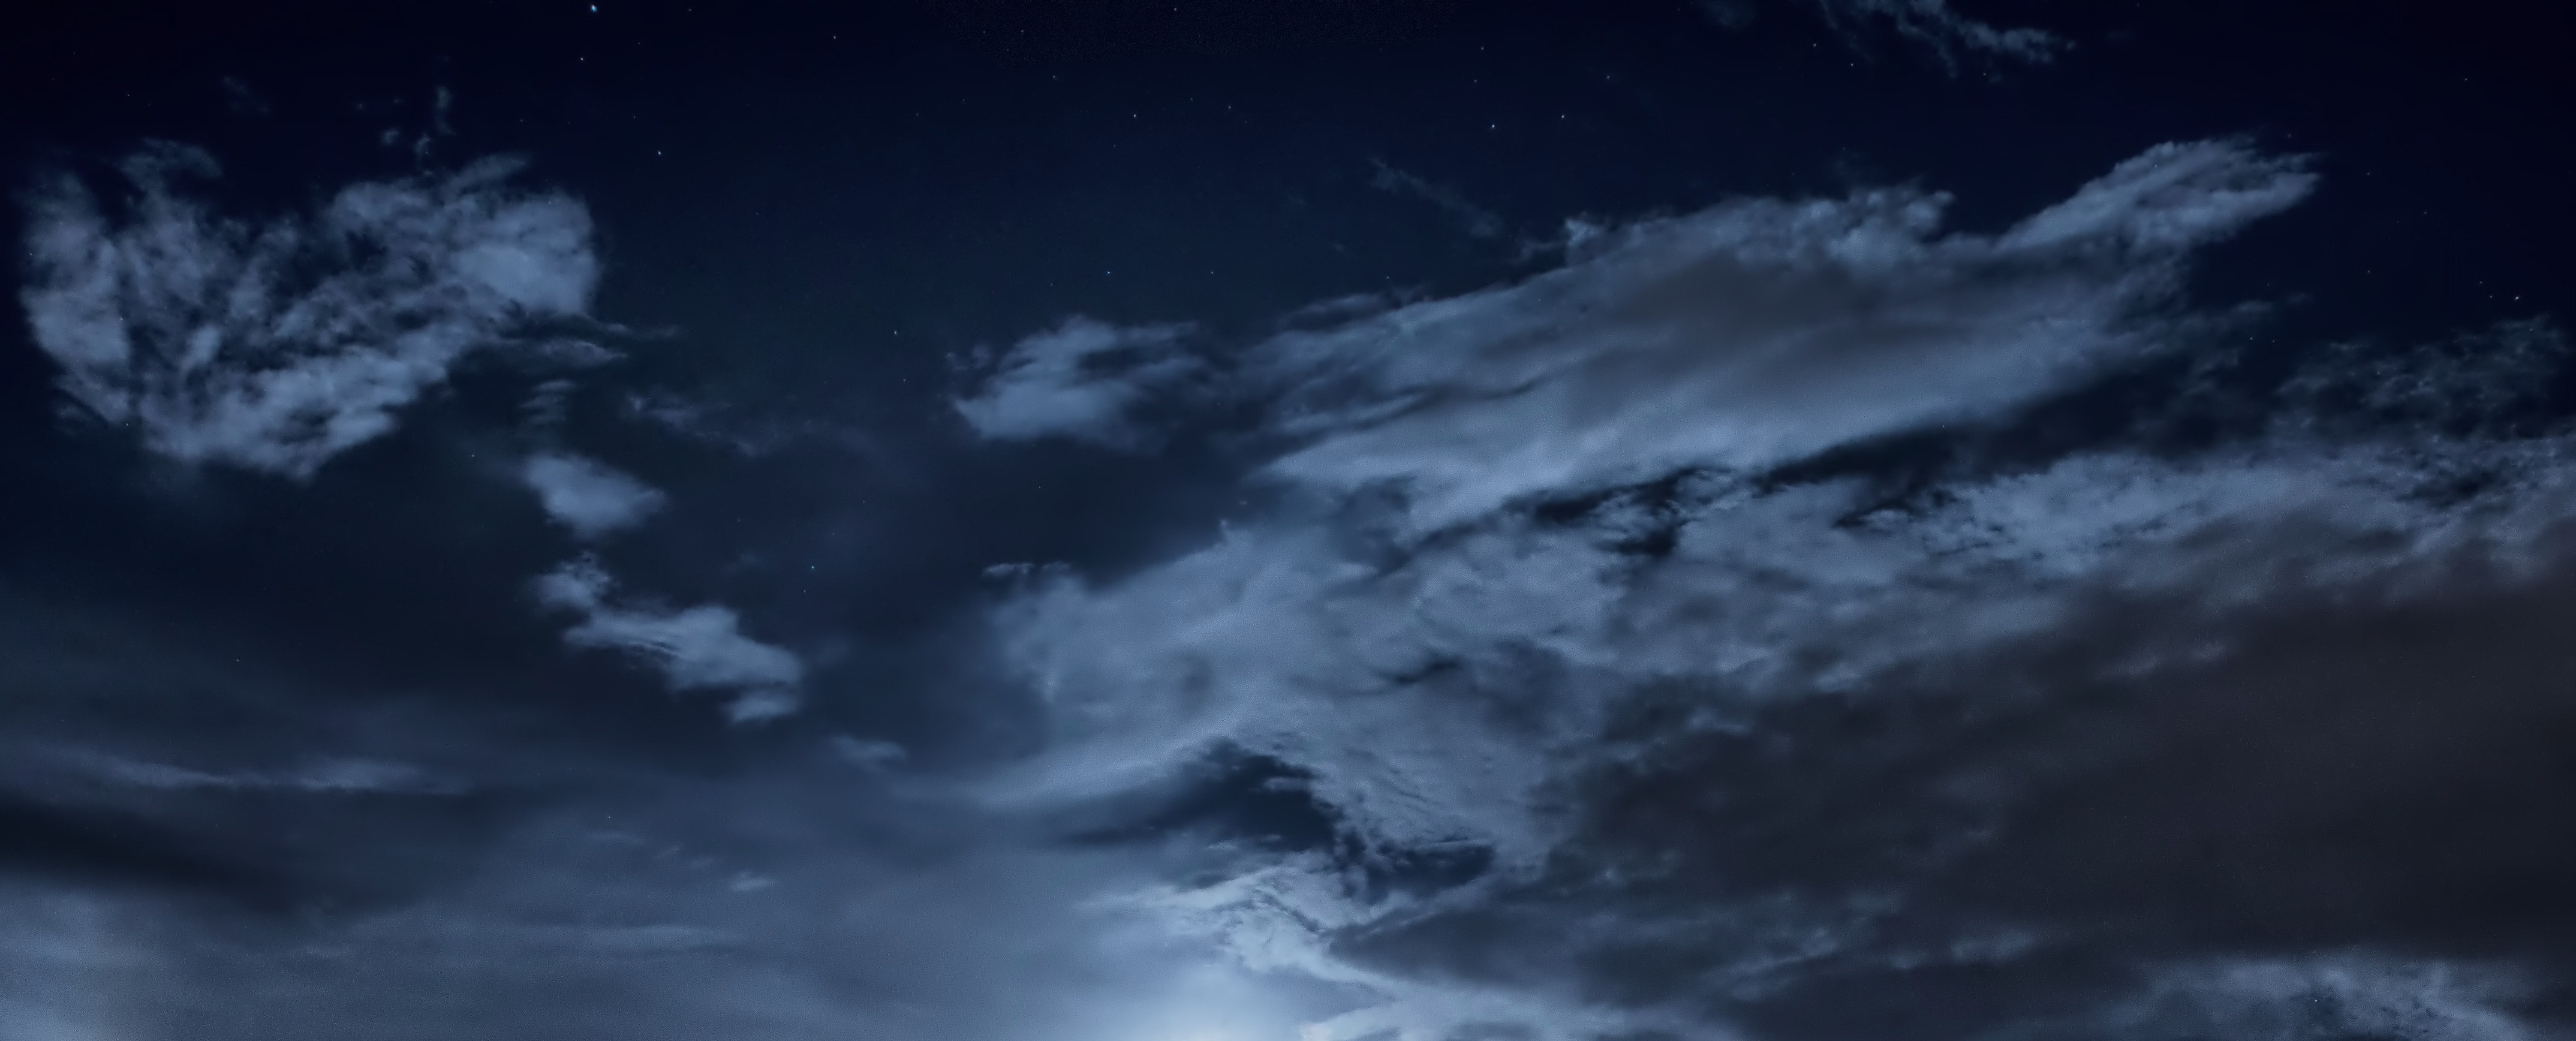 partly cloudy night sky